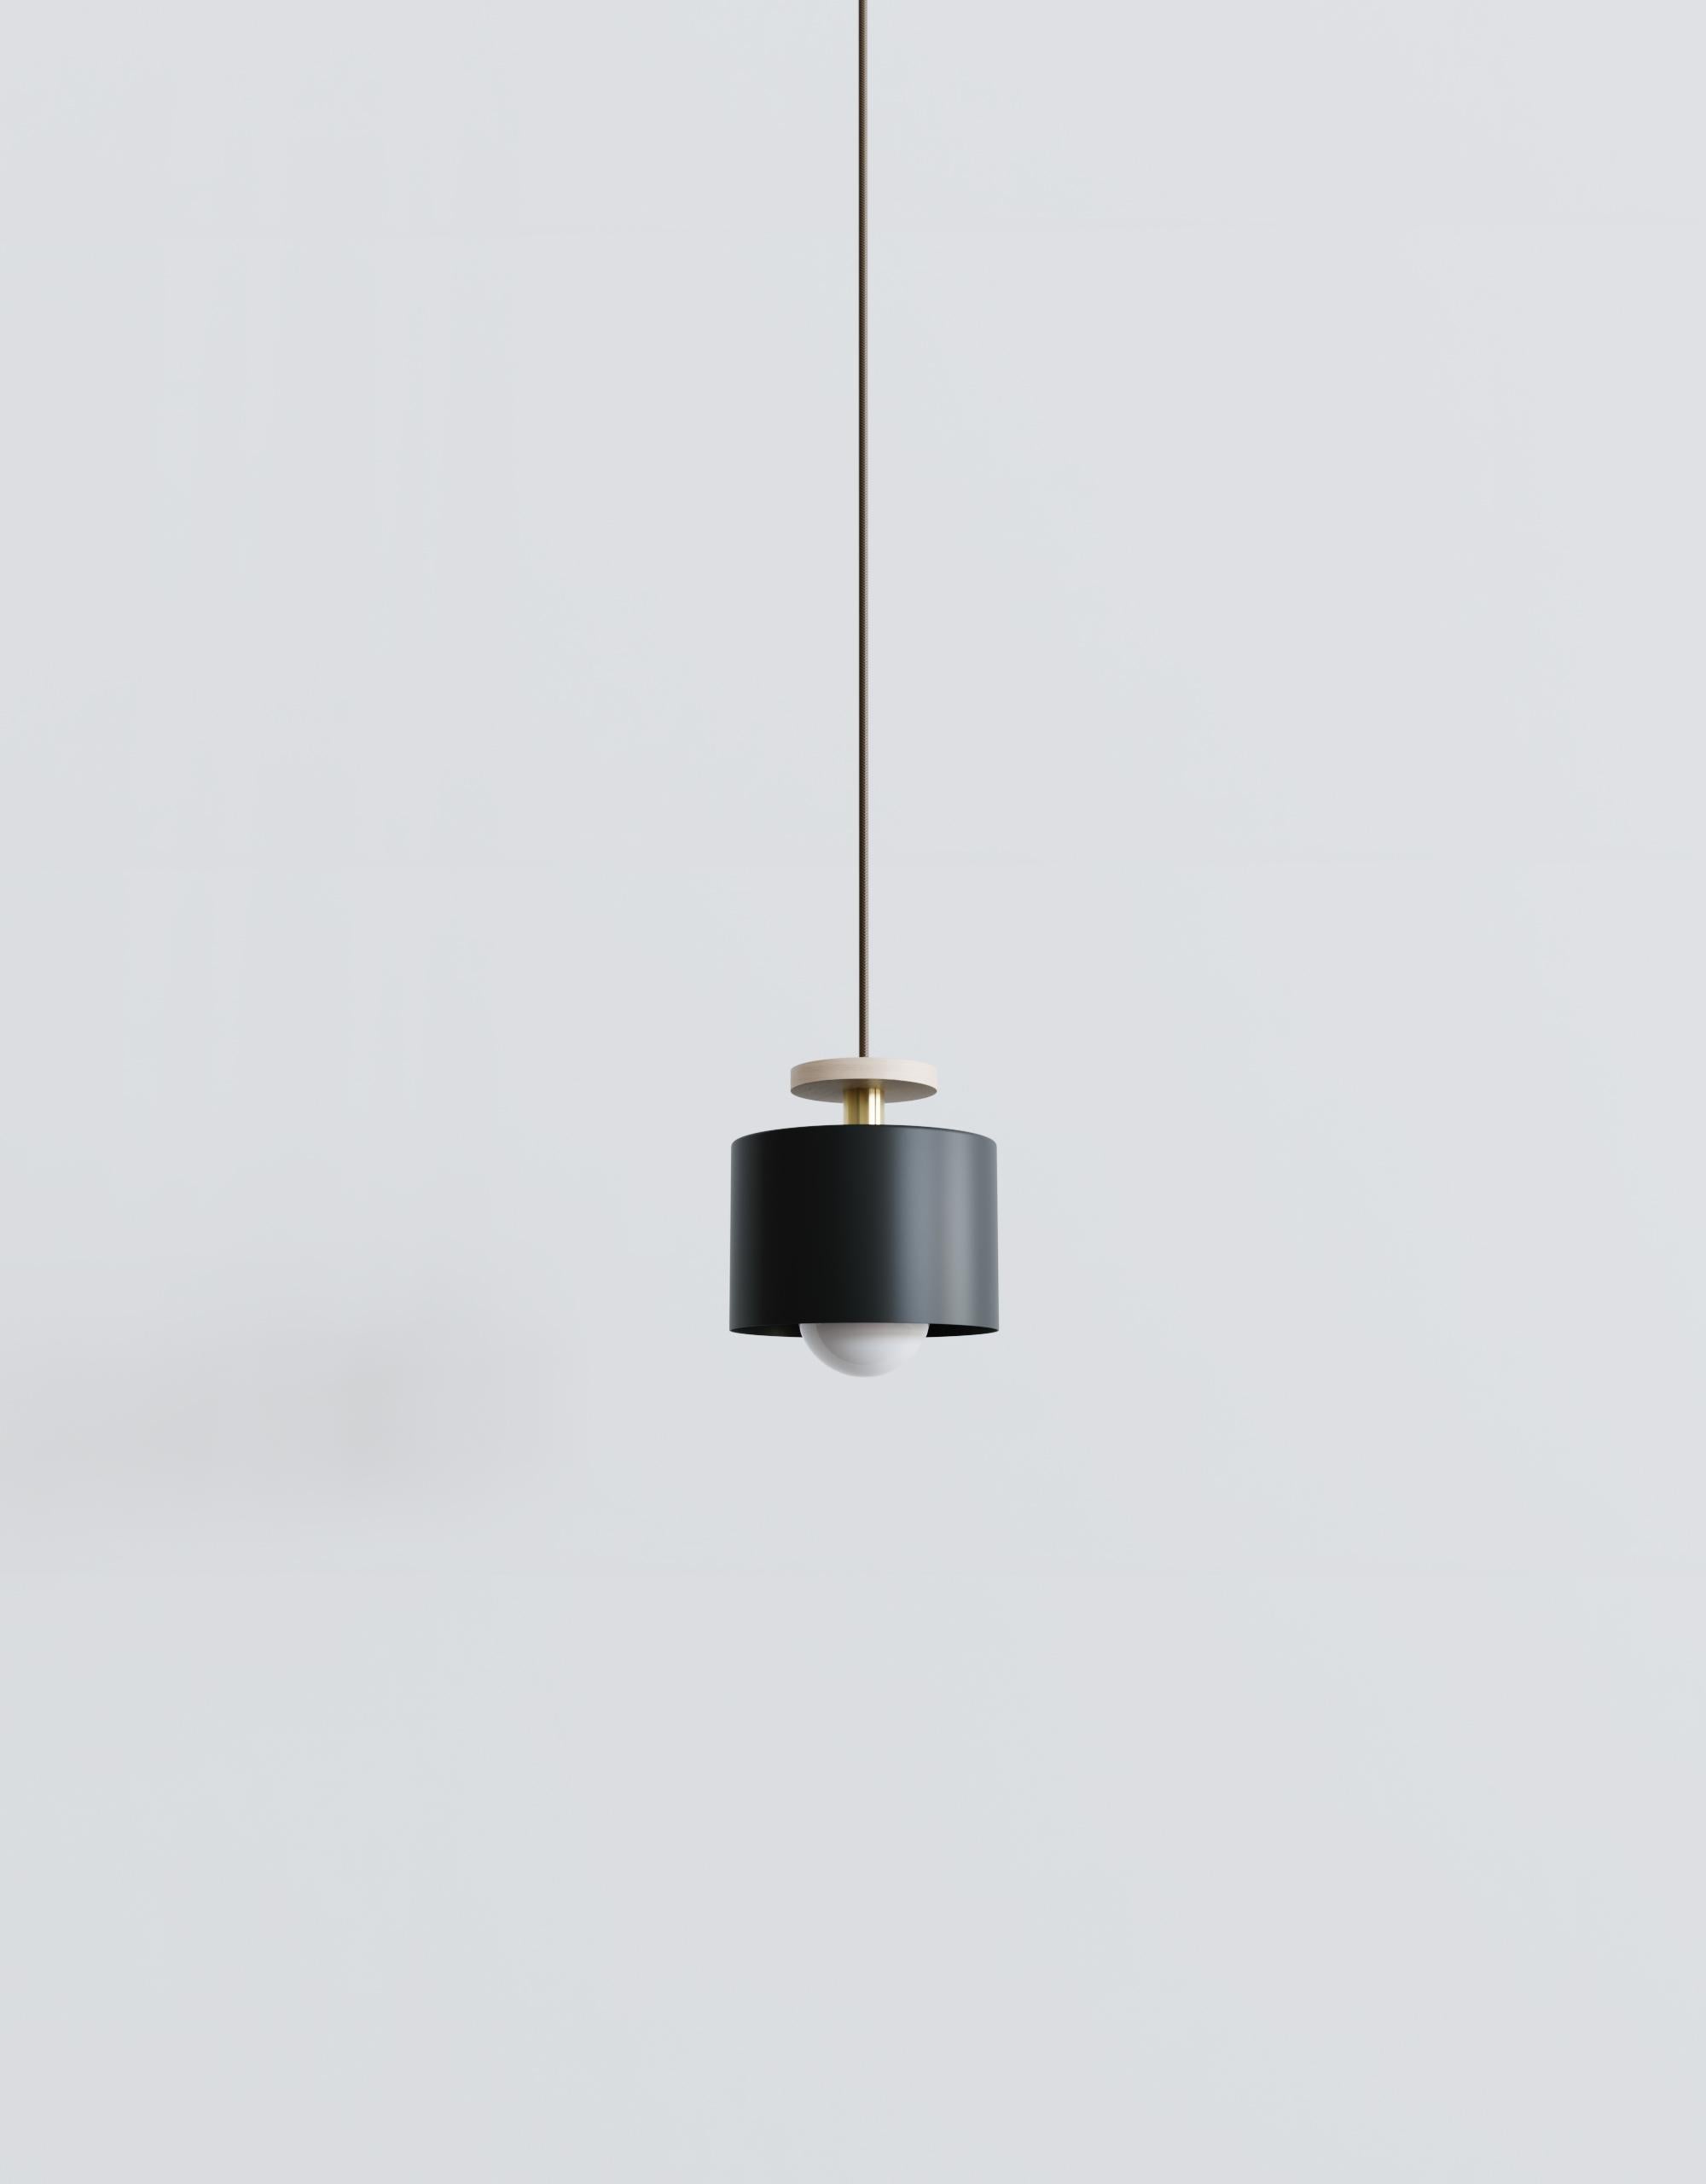 As if designing jewelry, Spun was created considered how each lighting component could complement the other to create tidy elegant compositions. Spun features a polished brass, matte black, or frosted glass shade, which encases an exposed globe